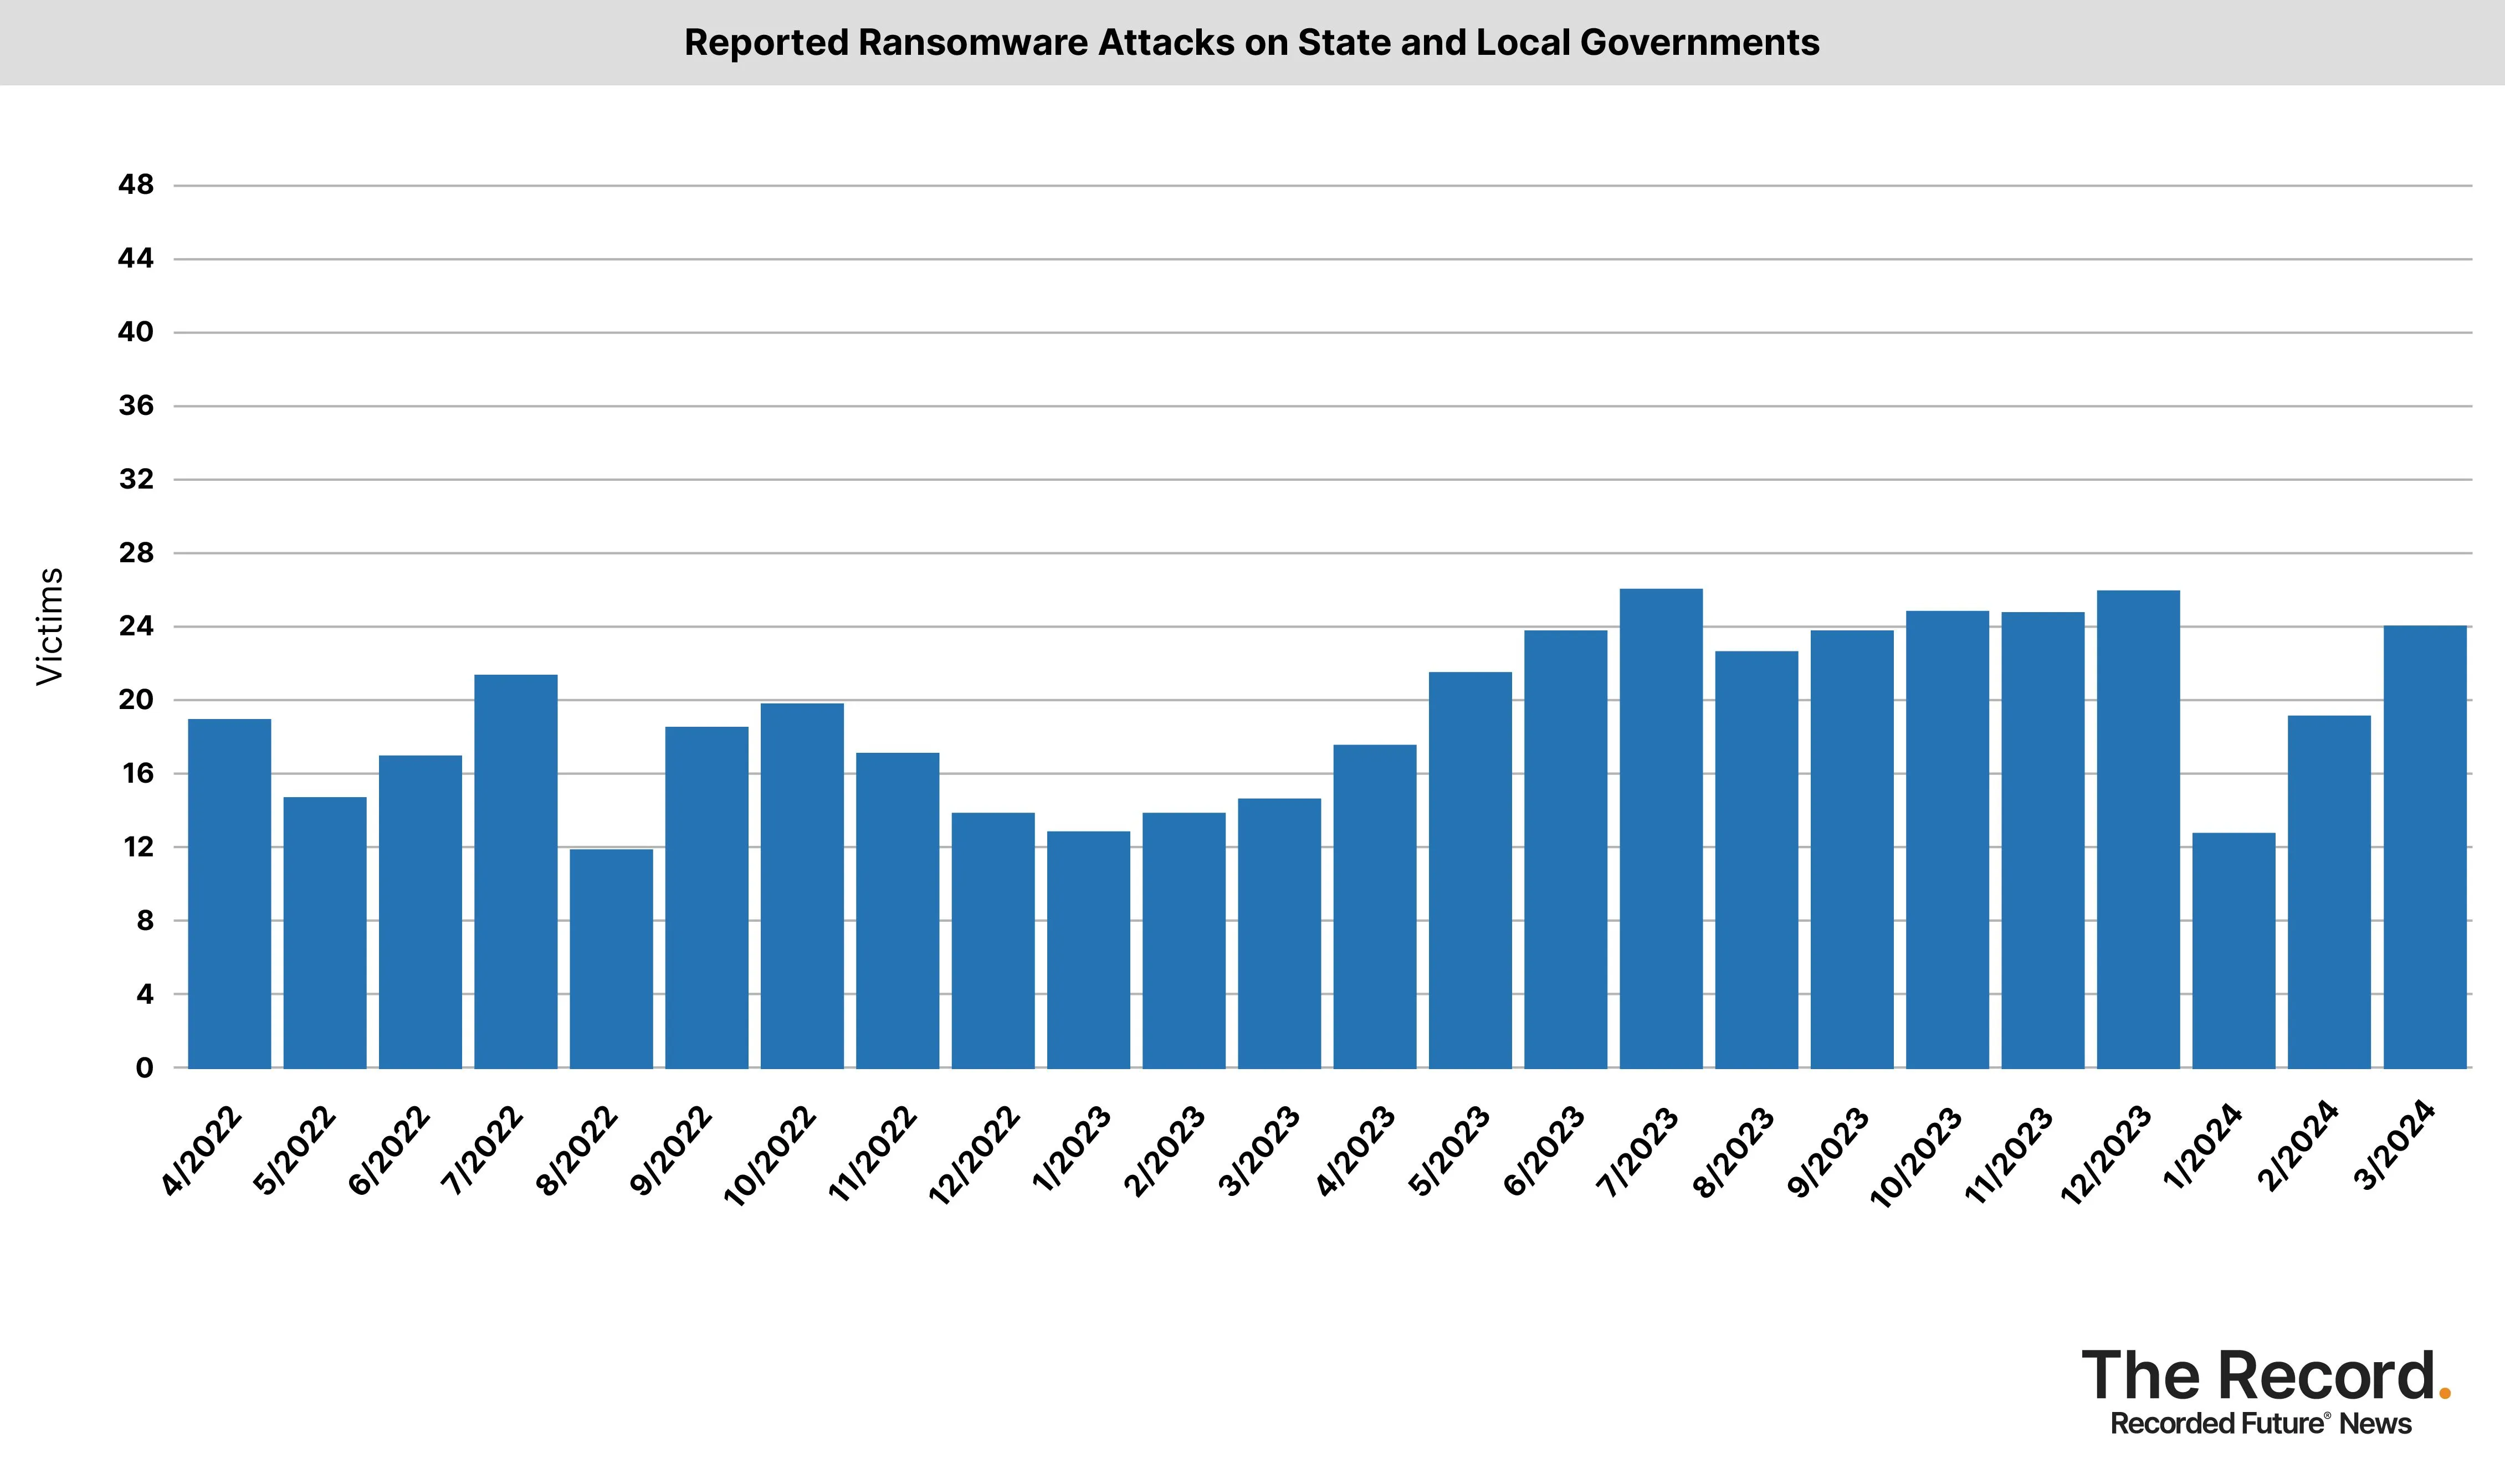 2024_0412 - Ransomware Tracker_Reported Ransomware Attacks on State and Local Governments.jpg